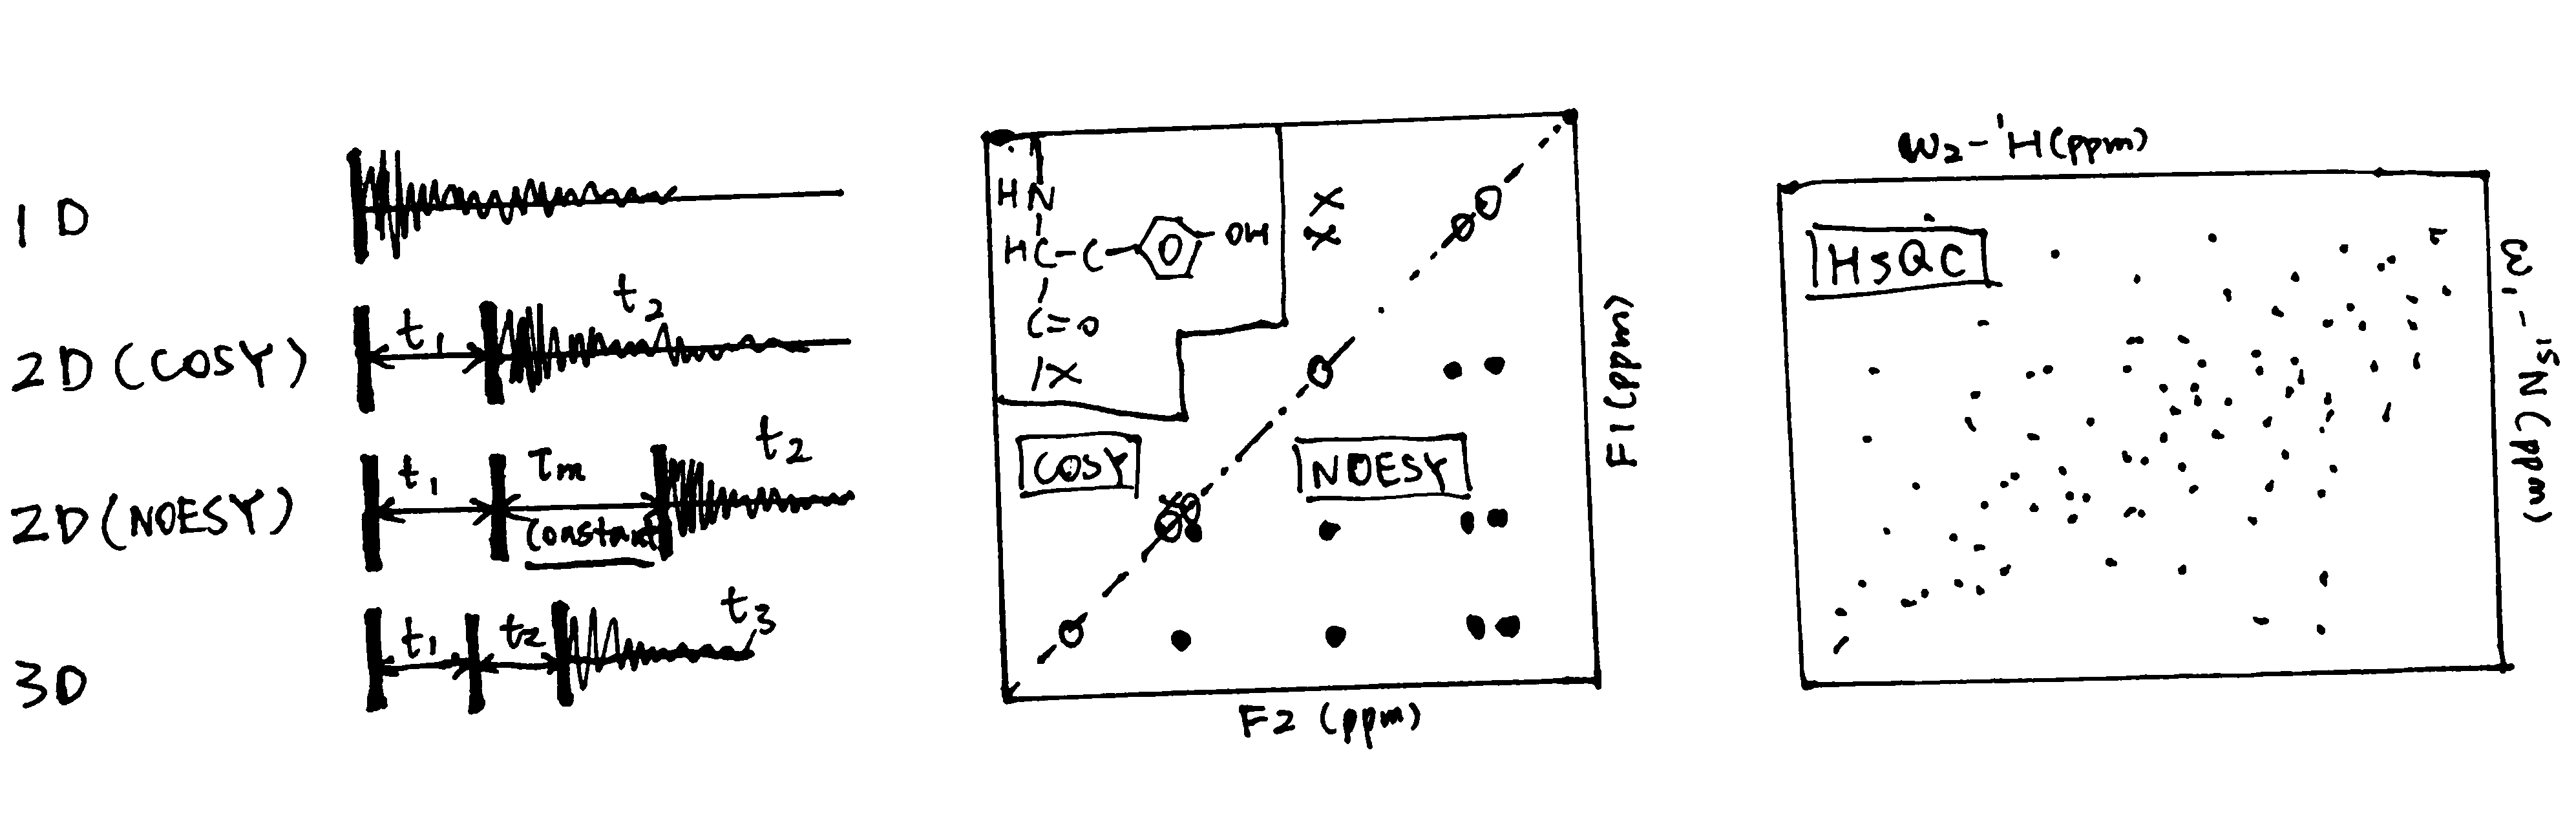 Schematic of 1D, 2D and 3D NMR, and sample 